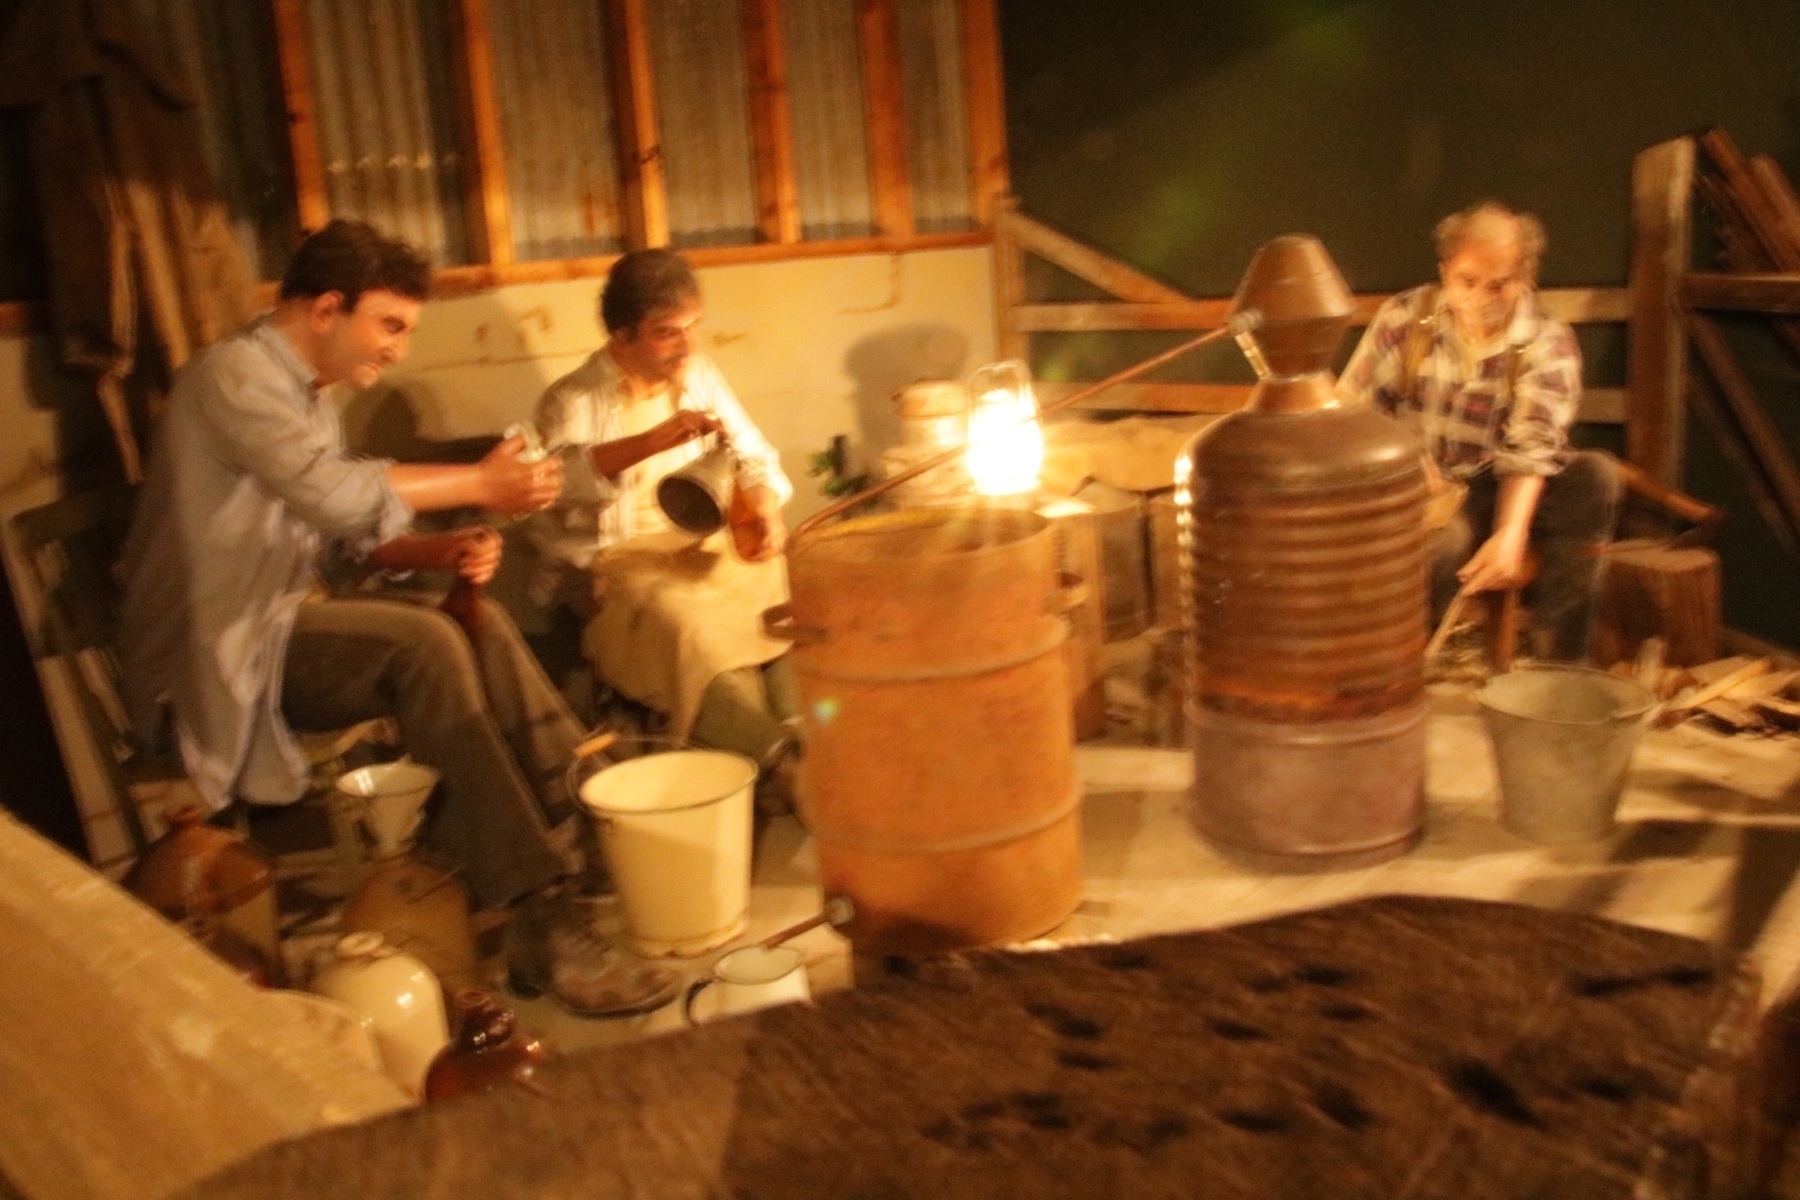 men sitting around a barrel with a long snout